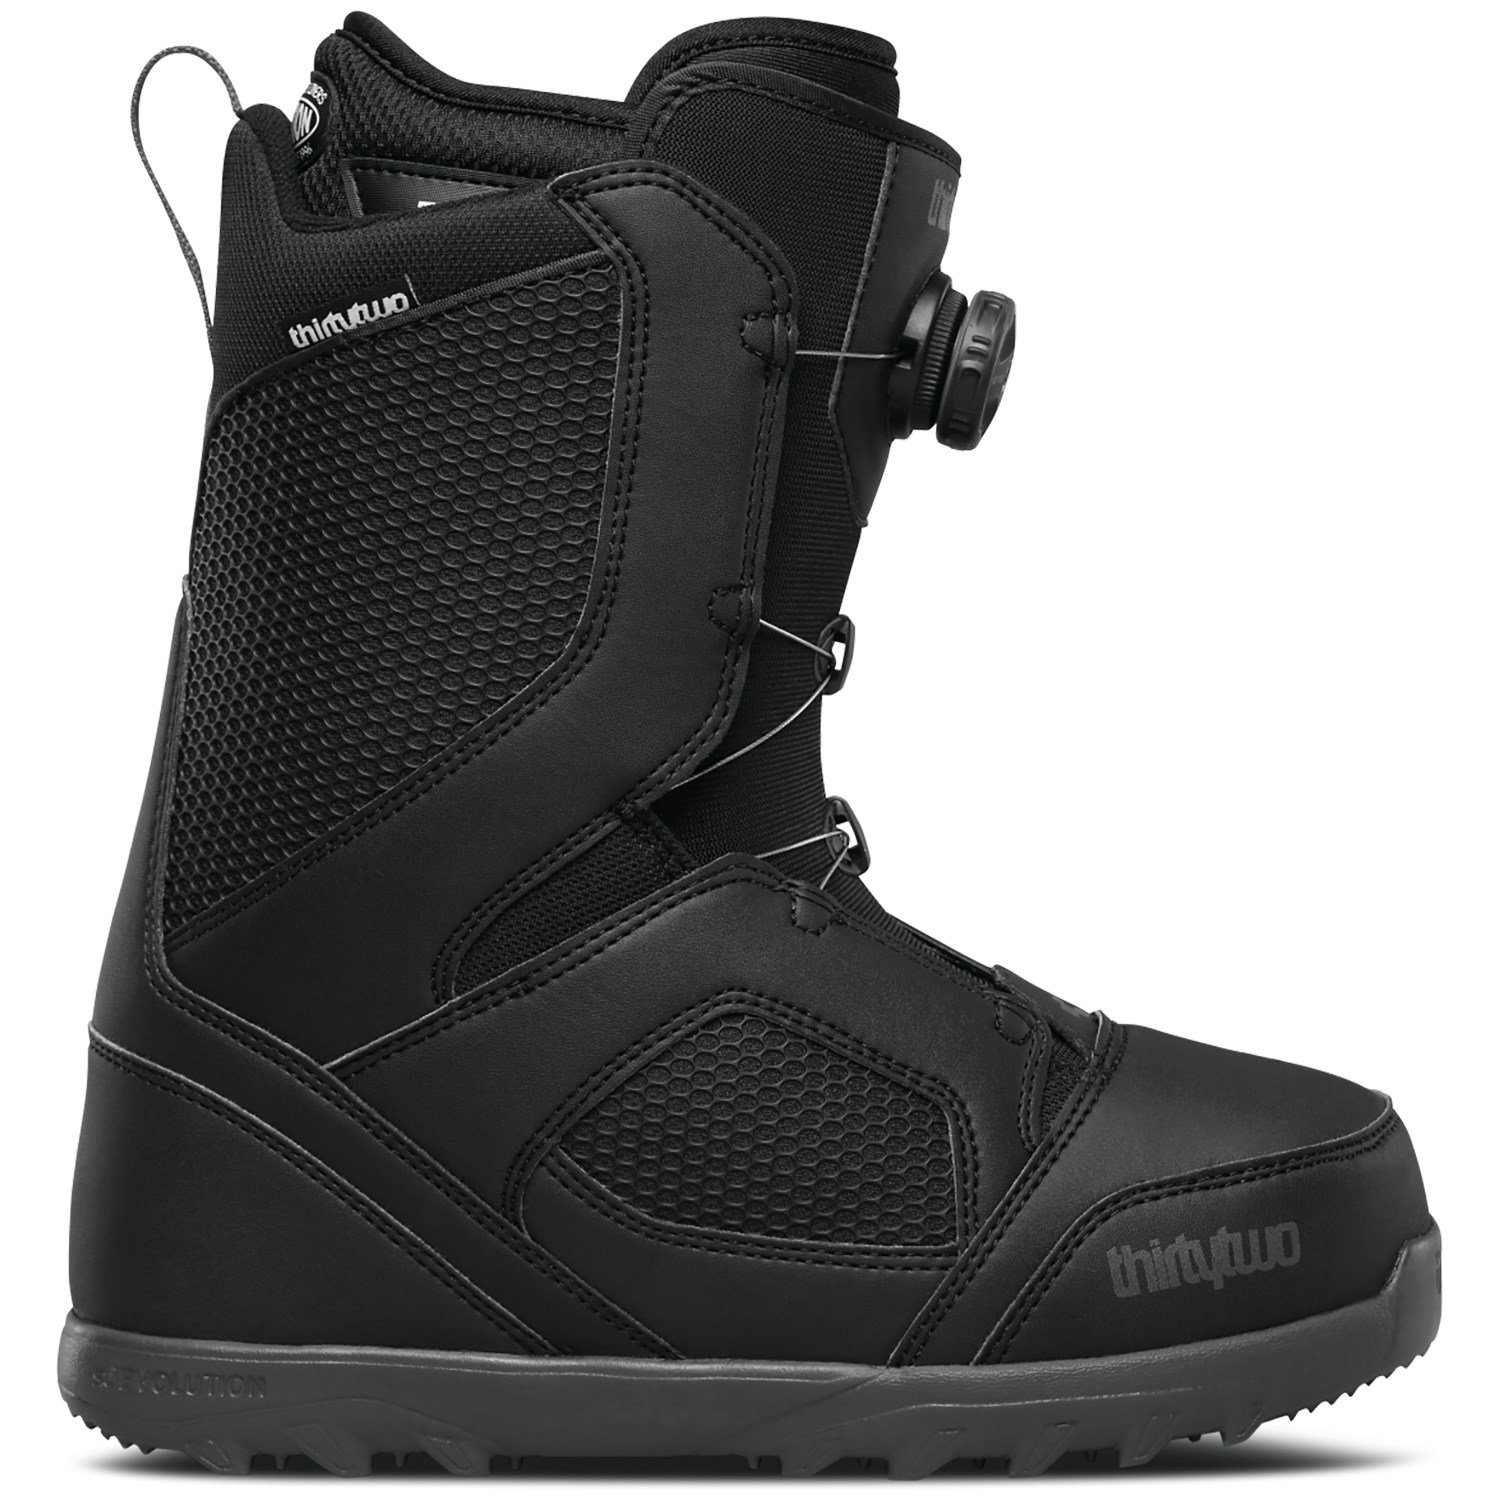 ThirtyTwo Womens STW BOA Snowboard Boots 